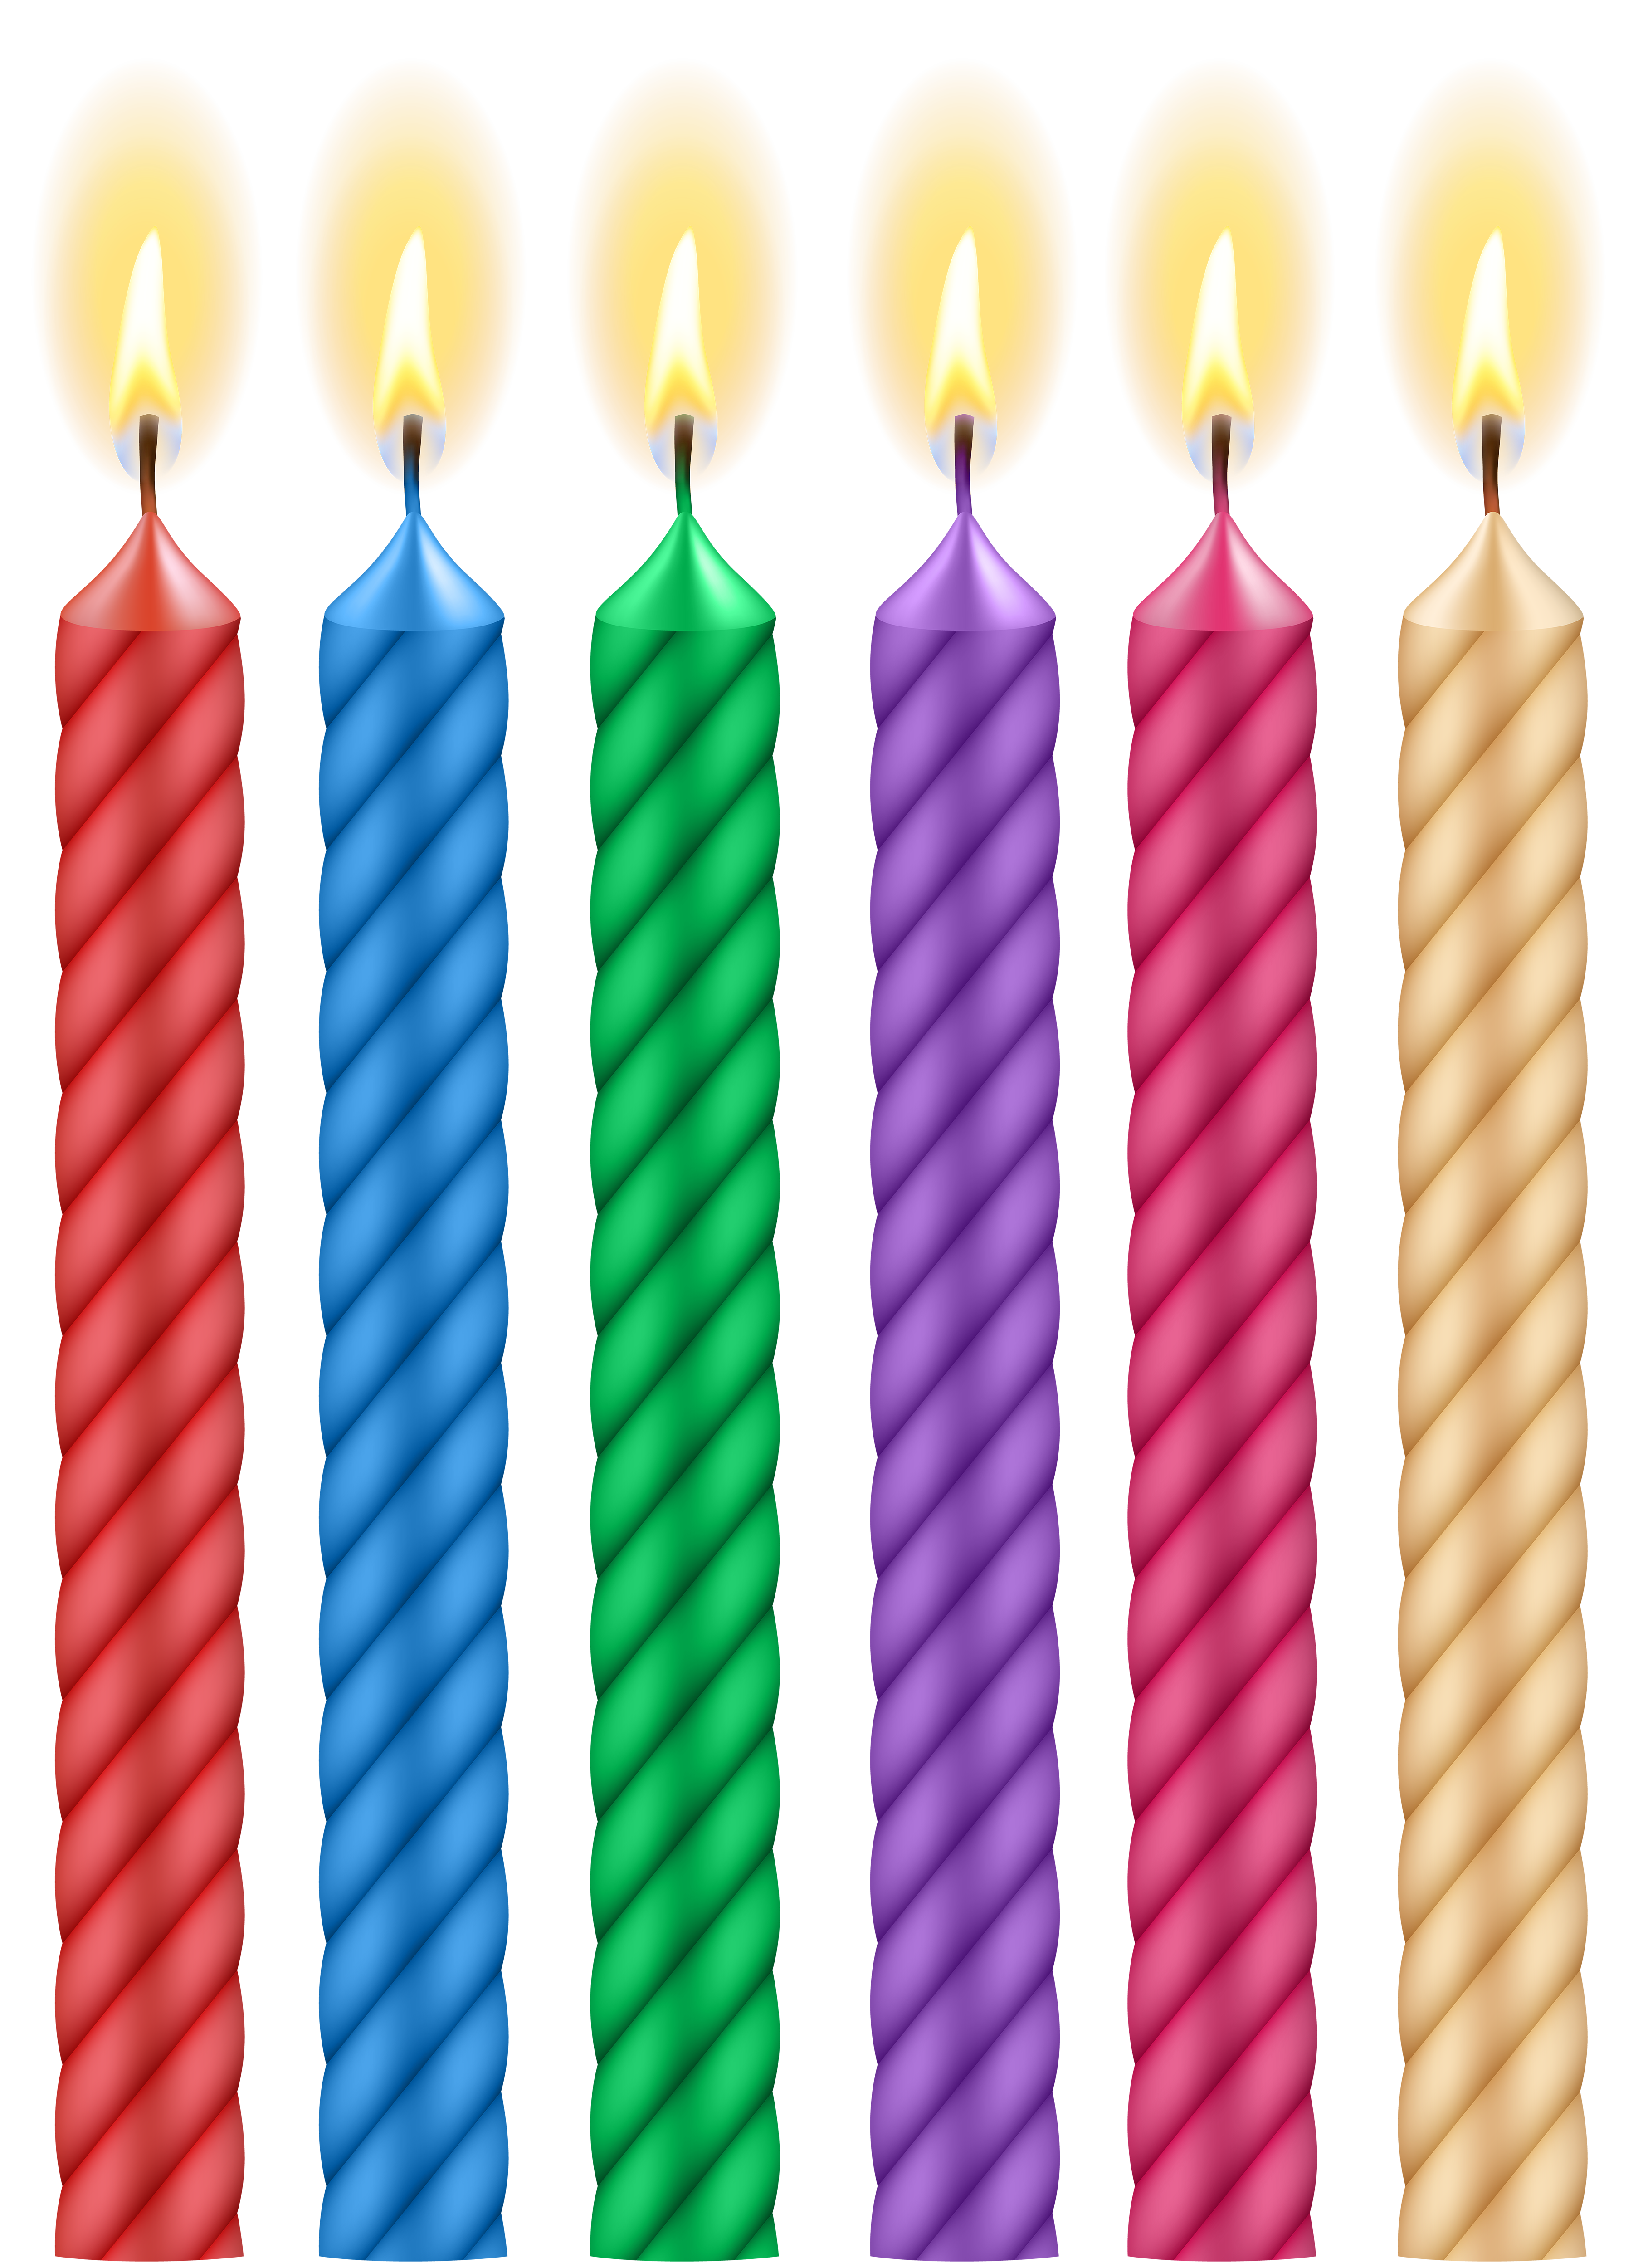 clipart birthday candle